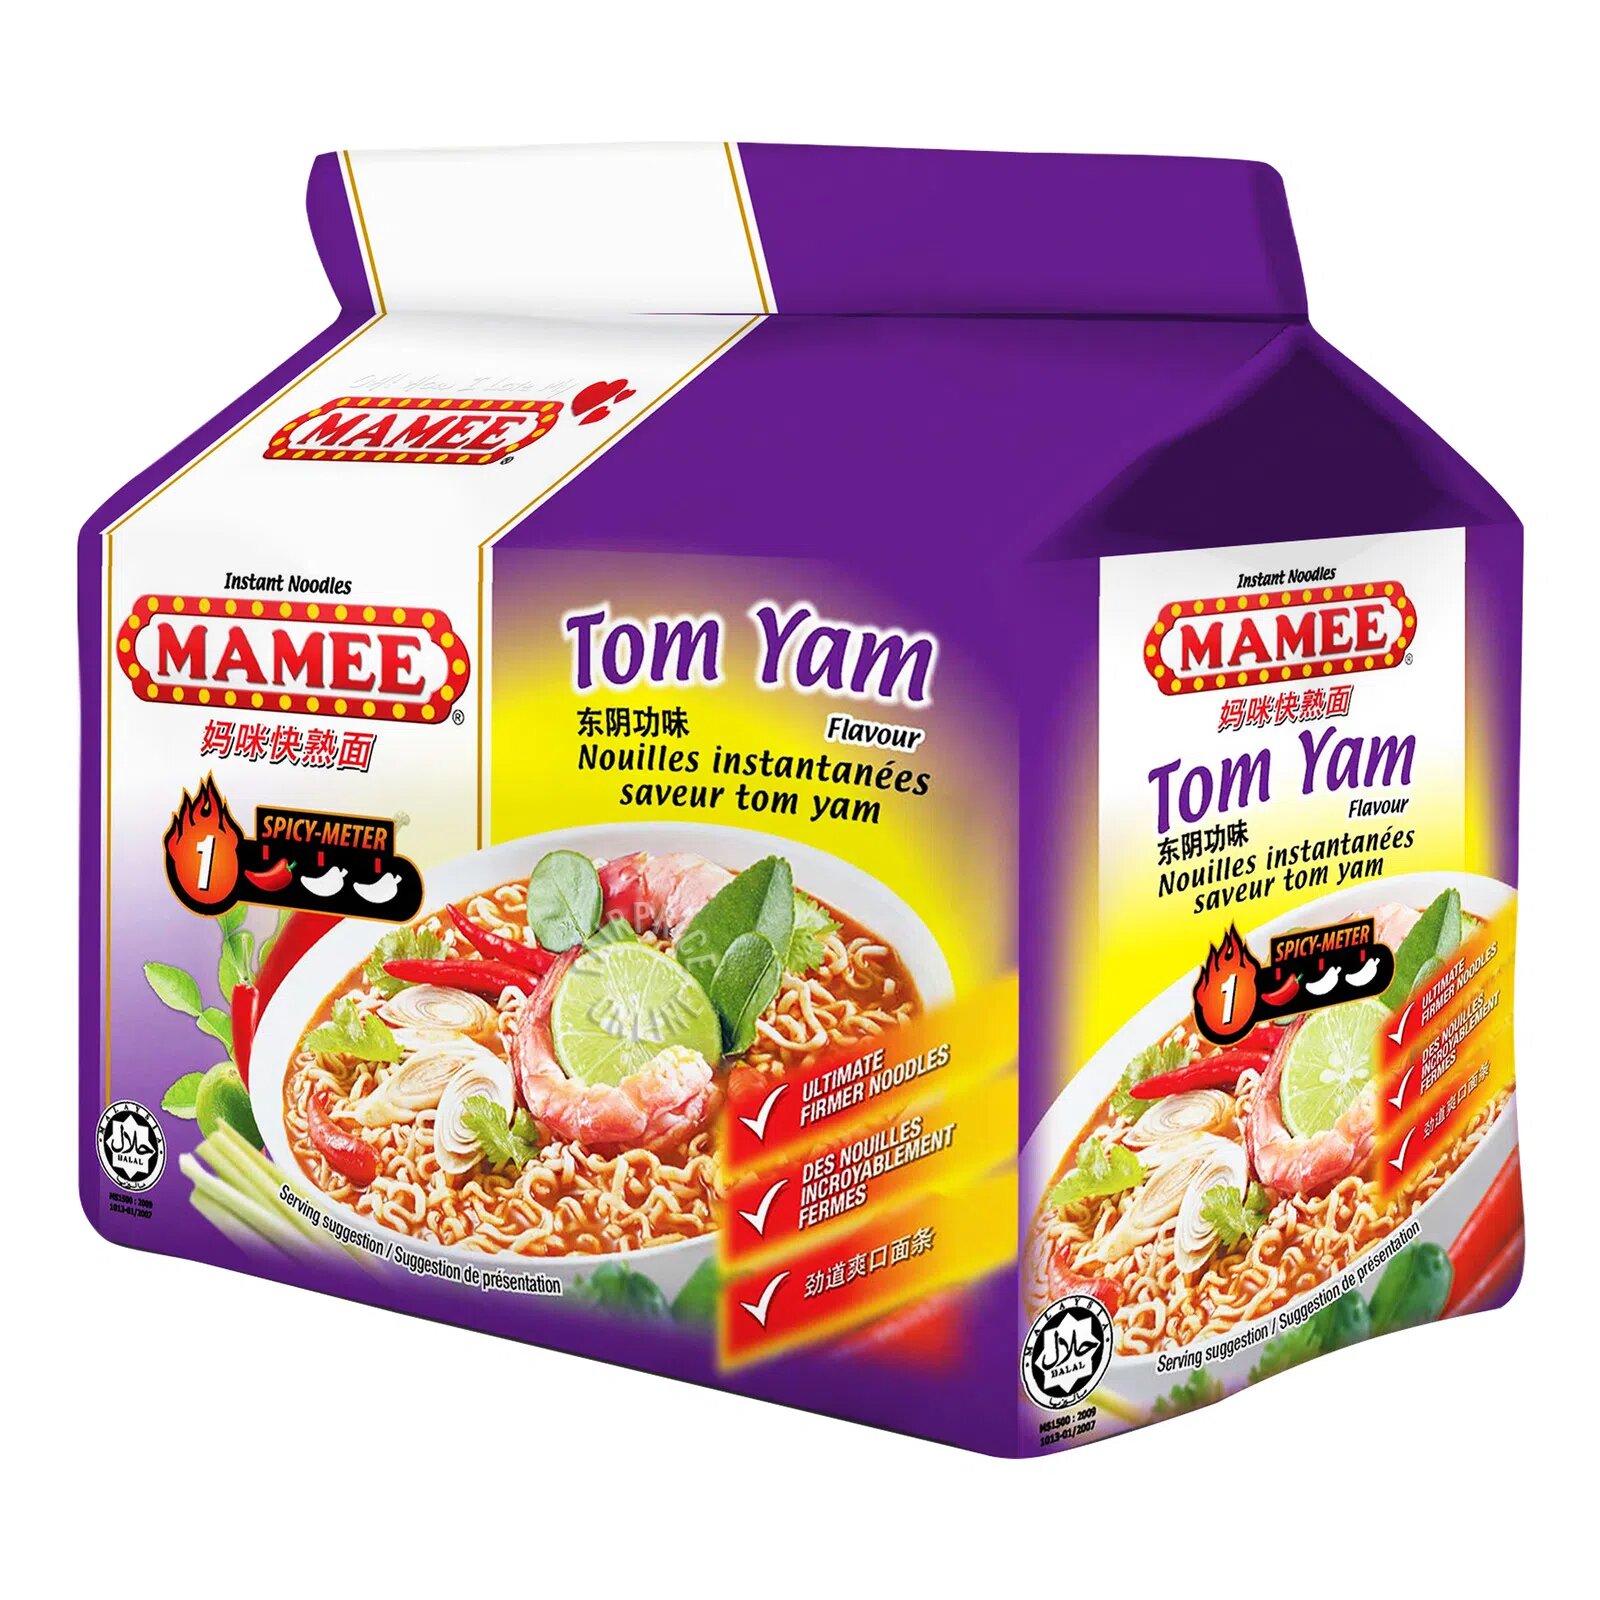 Mamee Instant Noodles - Tom Yam